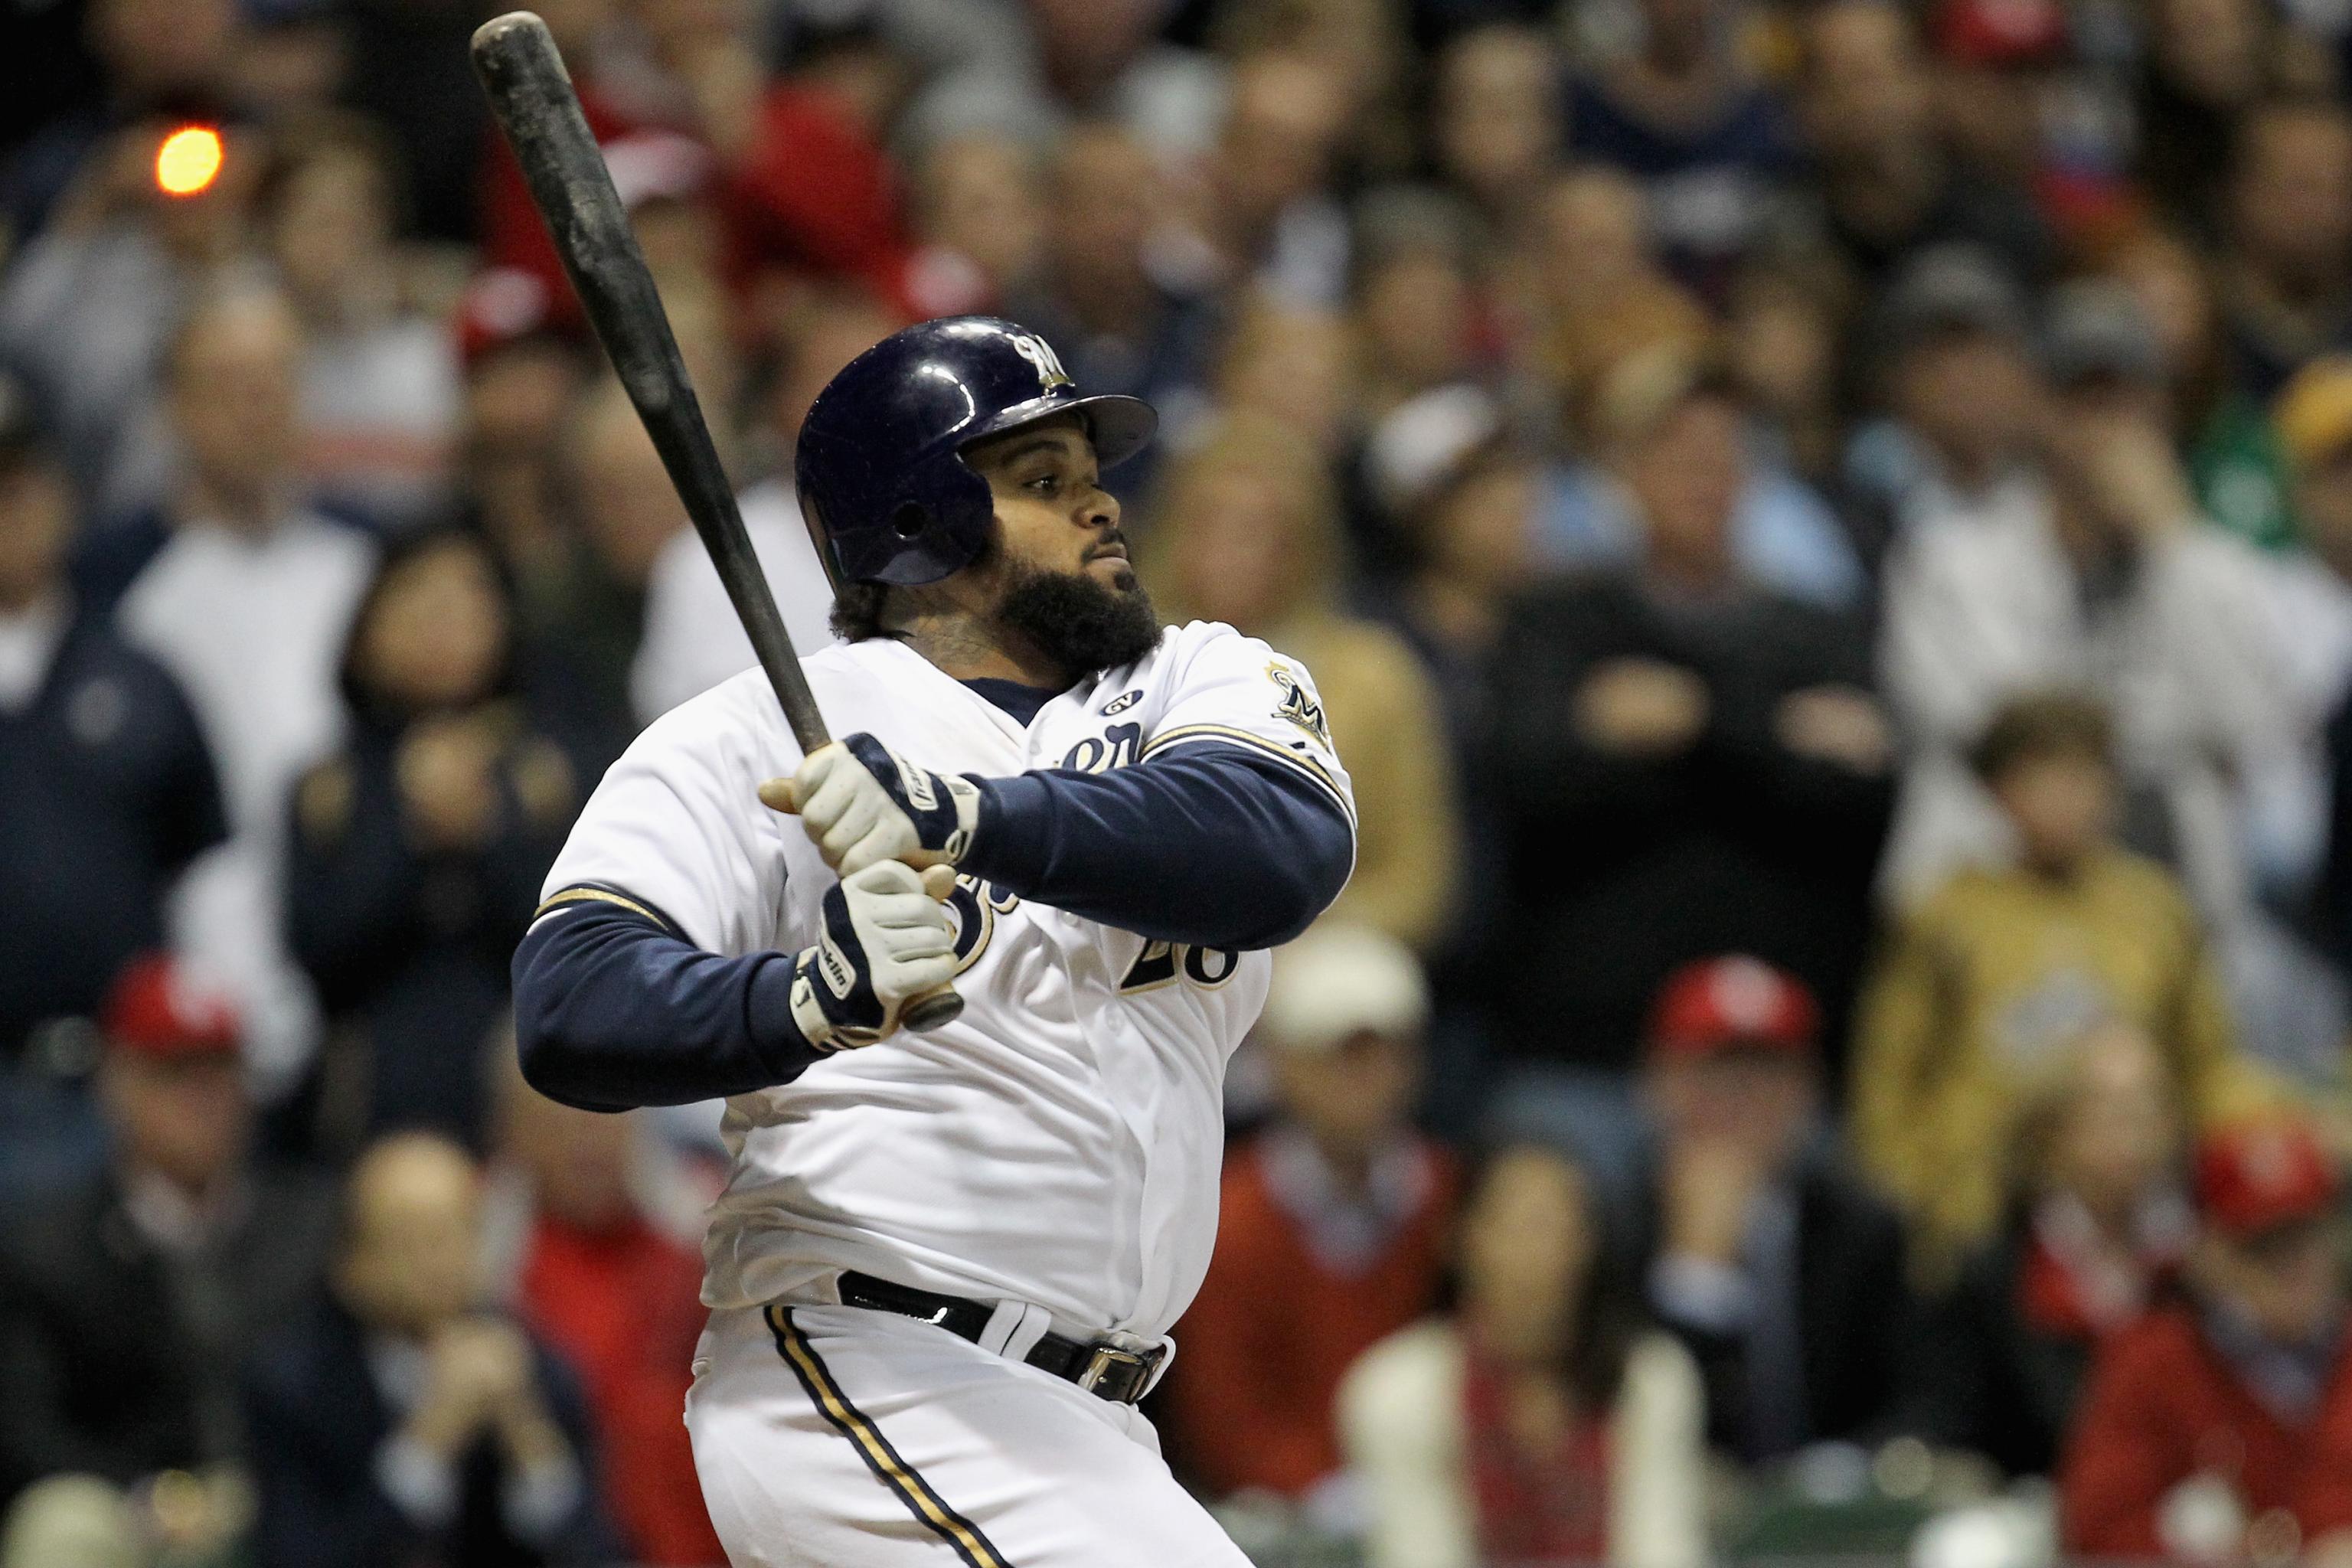 Prince Fielder trade: Mourning the end of something special